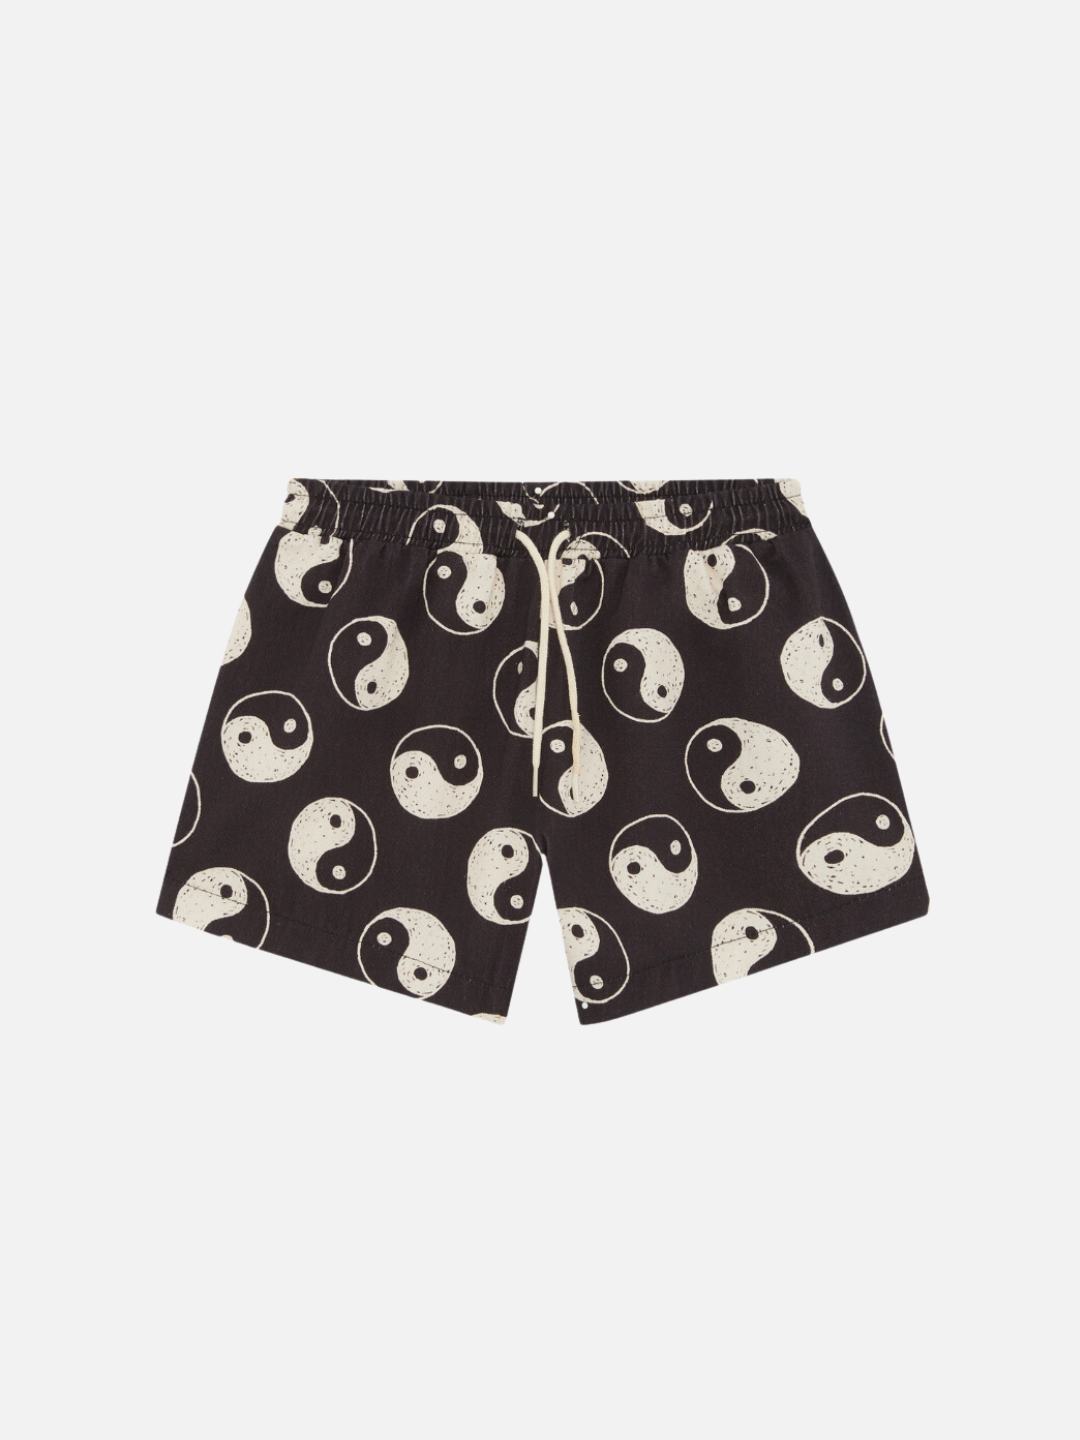 A front view of the elastic drawstring black shorts with a yin and yang pattern all over.